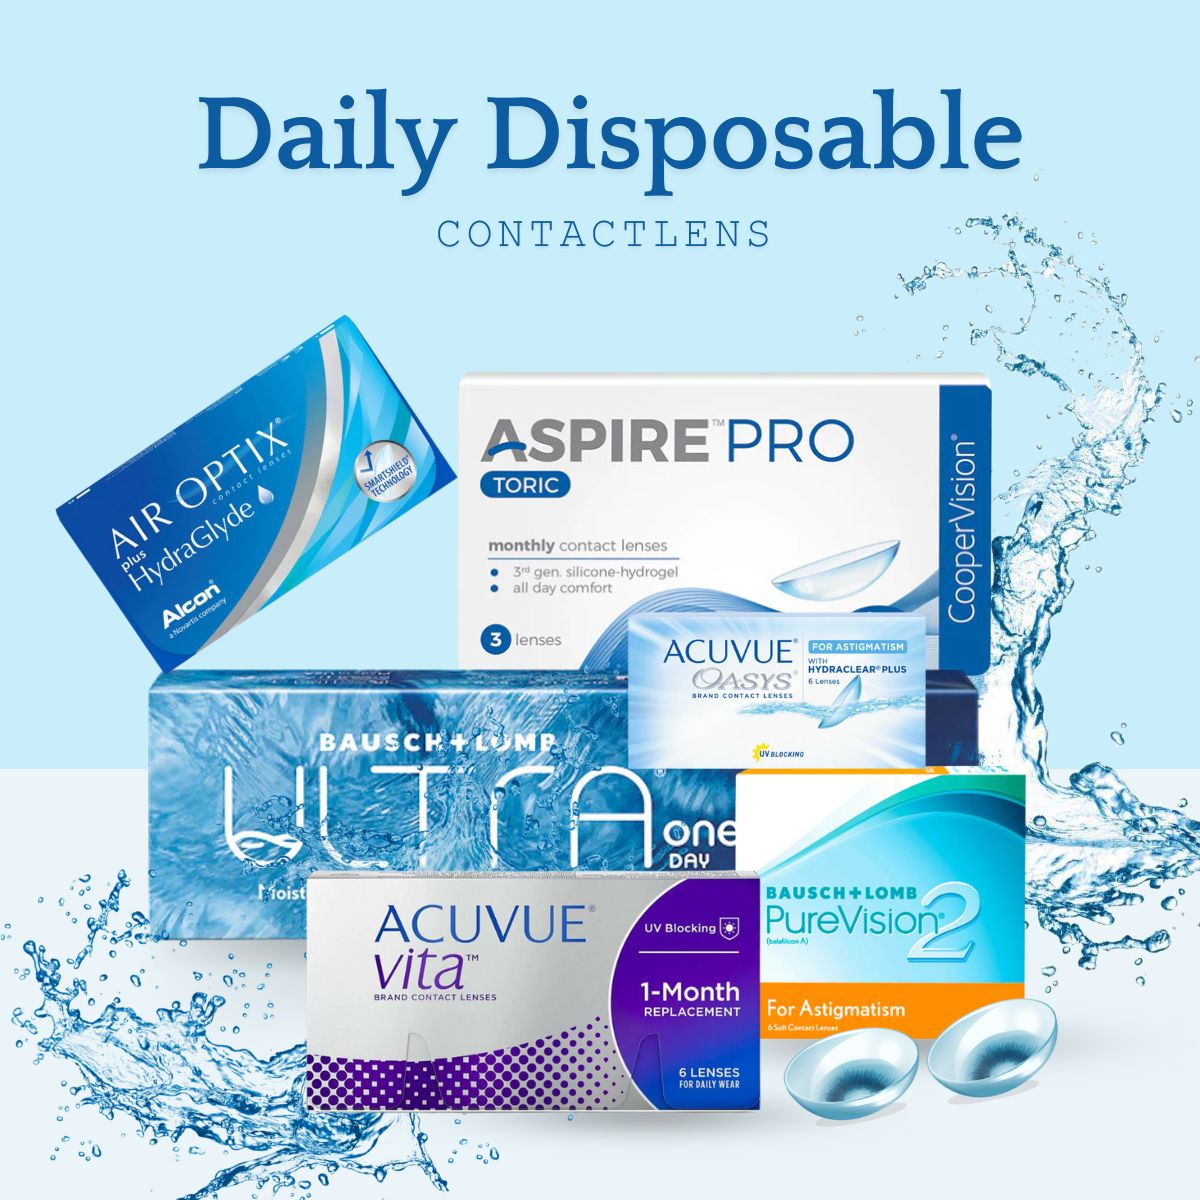 "Daily Contact Lens - Daily Disposable Contact Lens"